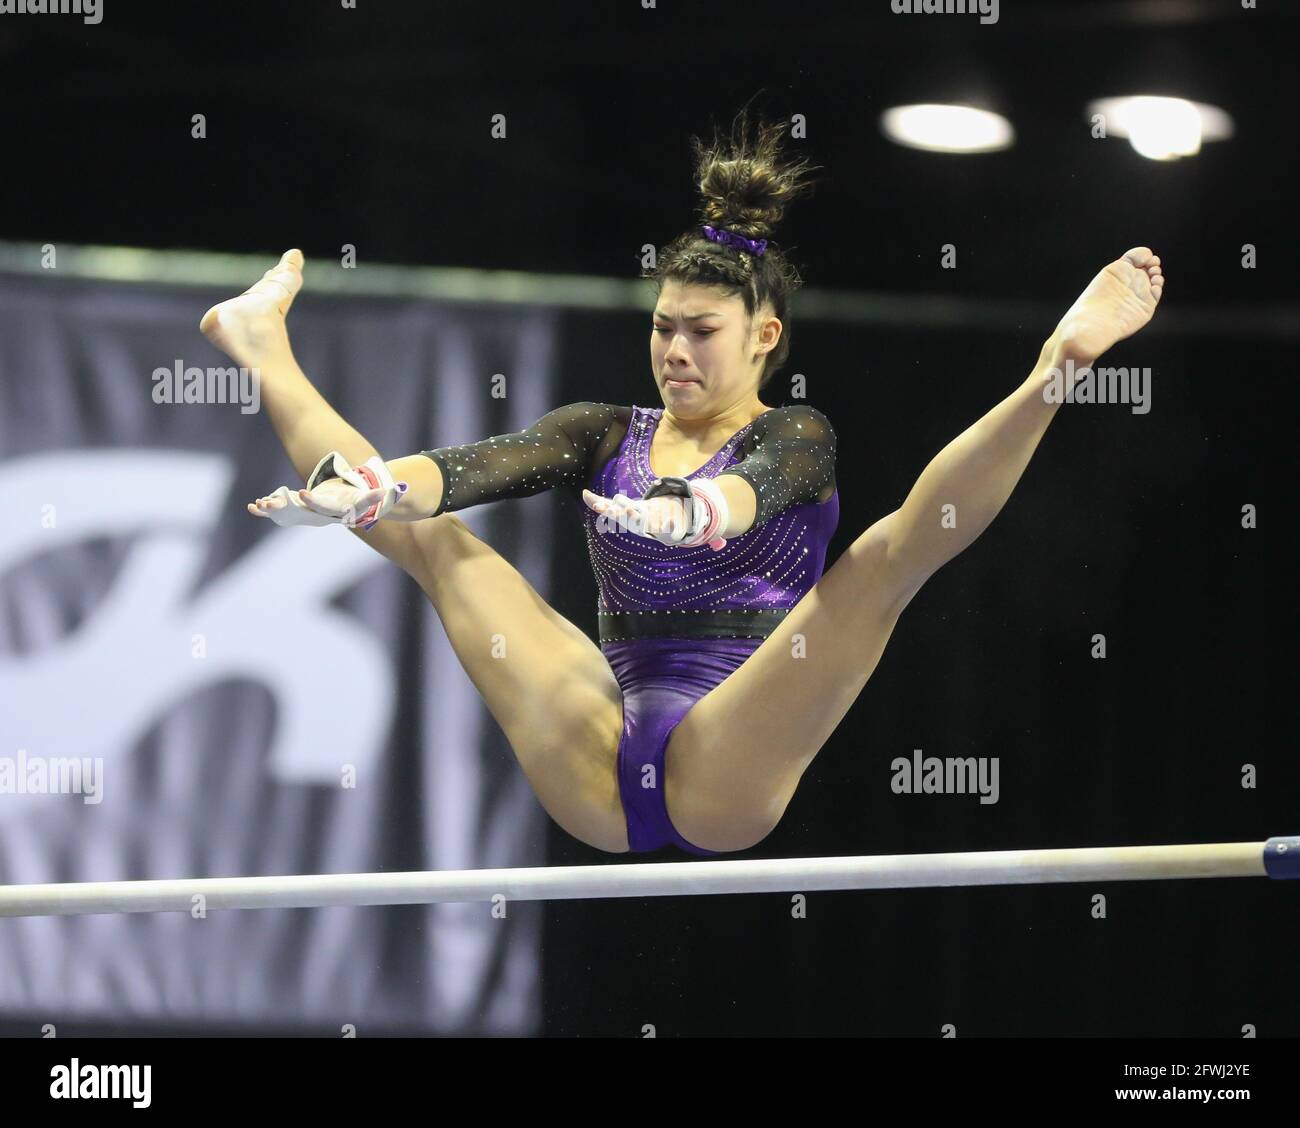 Indianapolis, USA. May 22, 2021: Kayla DiCello of Hill's Gymnastics performs on the uneven bars during the 2021 GK U.S. Classic at the Indiana Convention Center in Indianapolis, IN. Kyle Okita/CSM Credit: Cal Sport Media/Alamy Live News Stock Photo